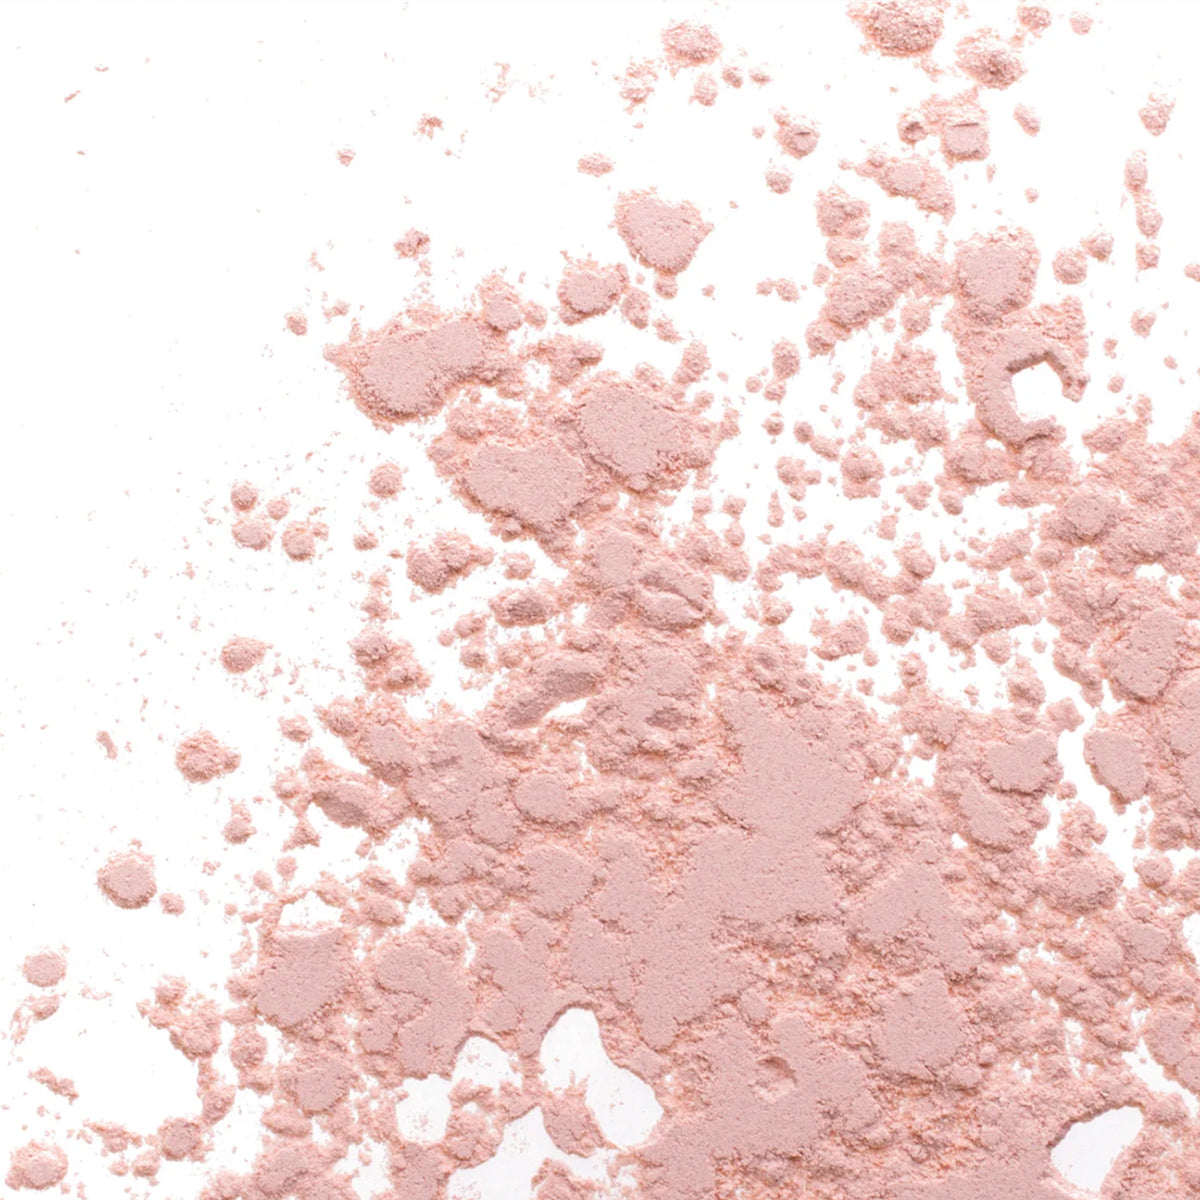 A close-up image of finely textured pink clay powder scattered across a white background, highlighting the natural pigment and soft texture of the clay used in 360 Botanics skincare products